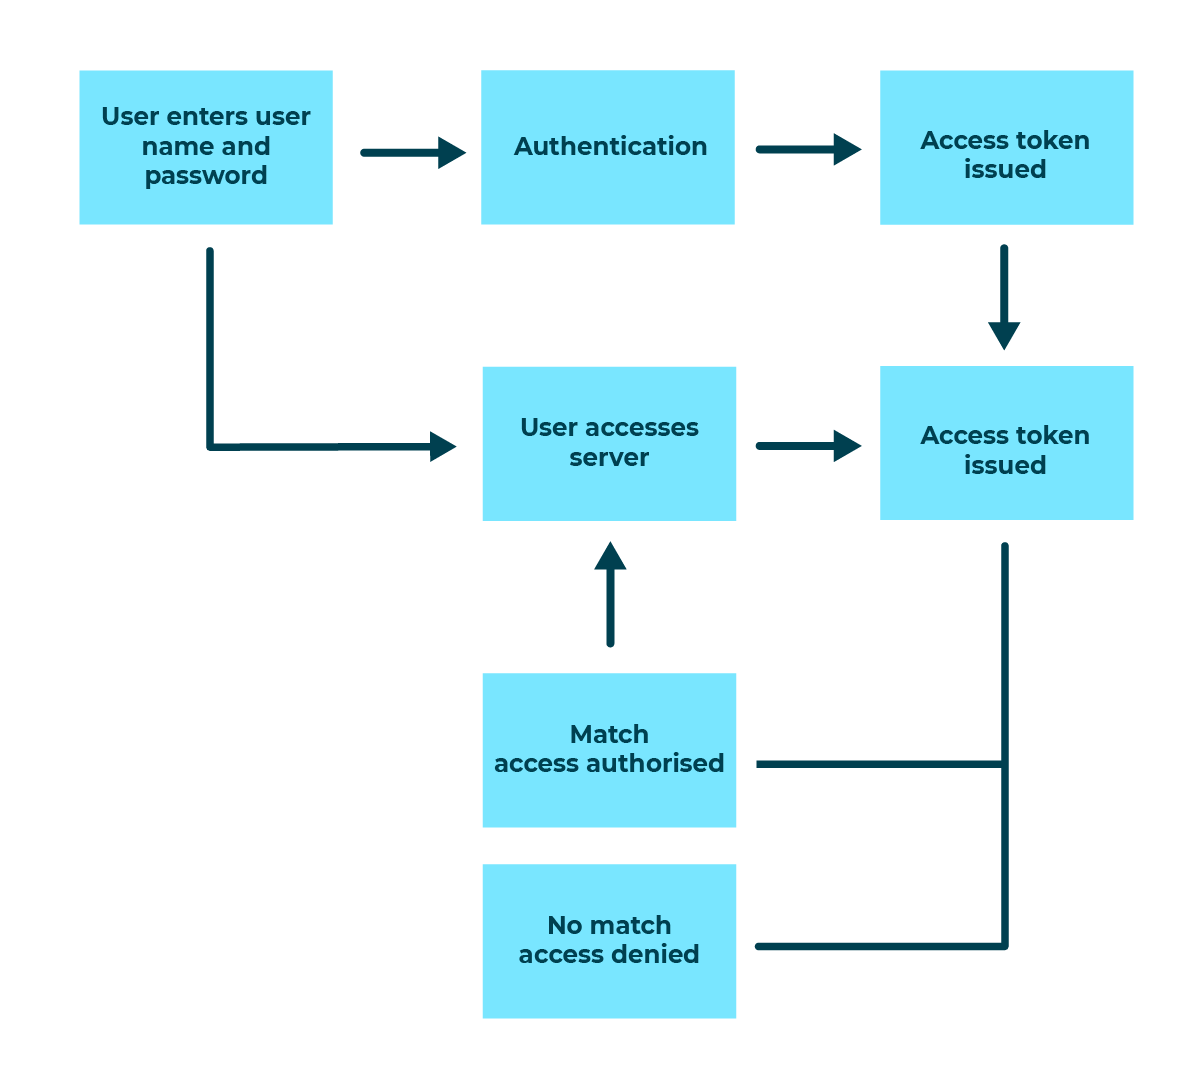 Flow diagram showing user authorization, from password to either access or denial of access.